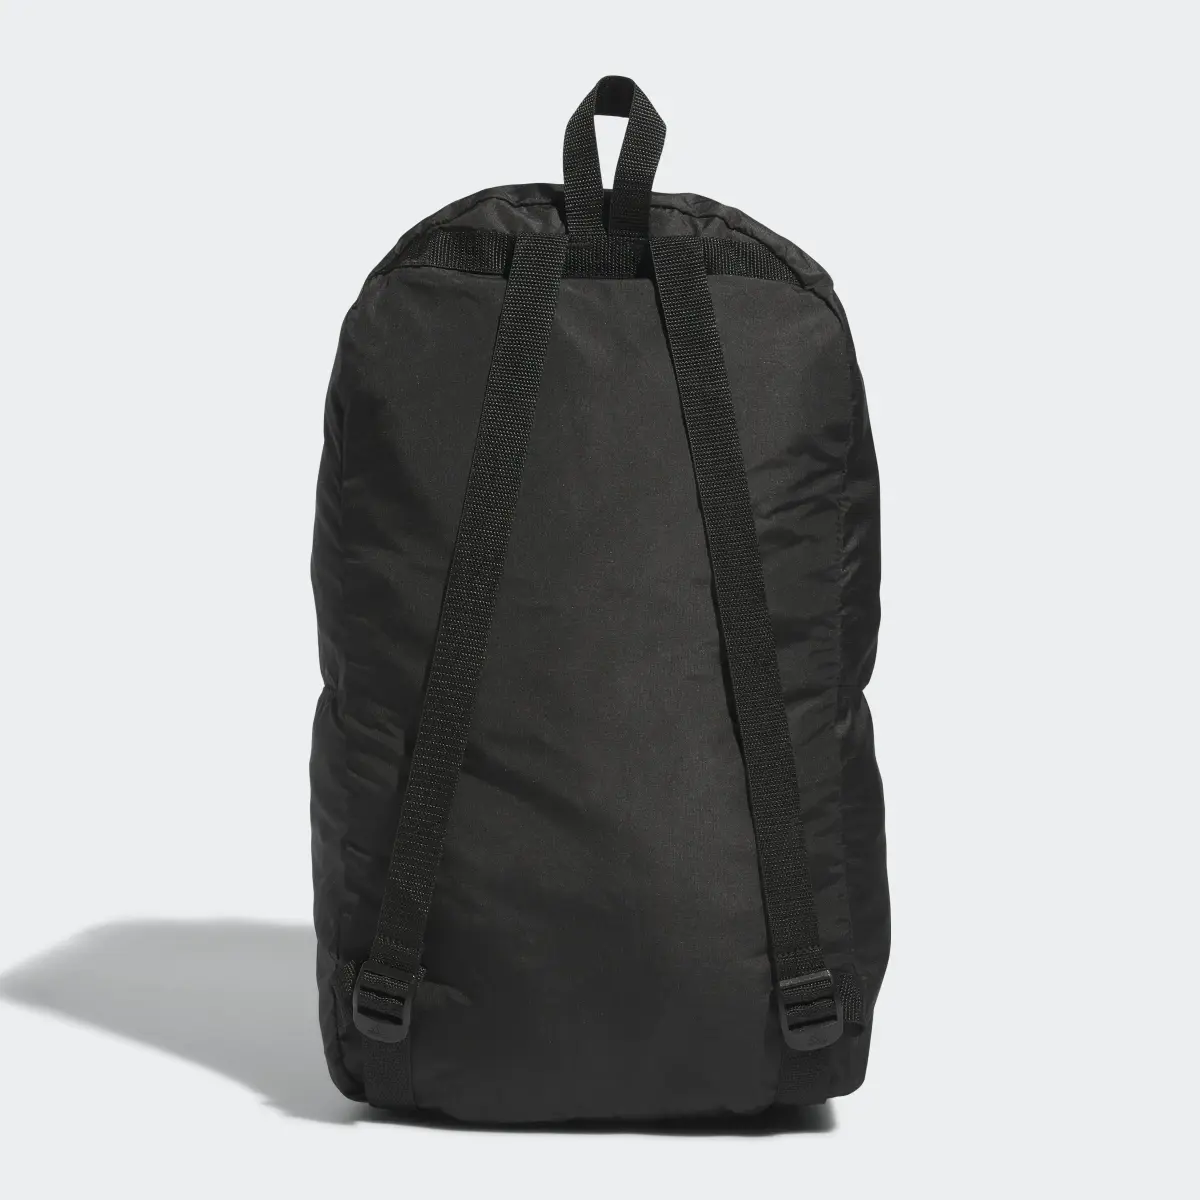 Adidas Golf Packable Backpack. 3